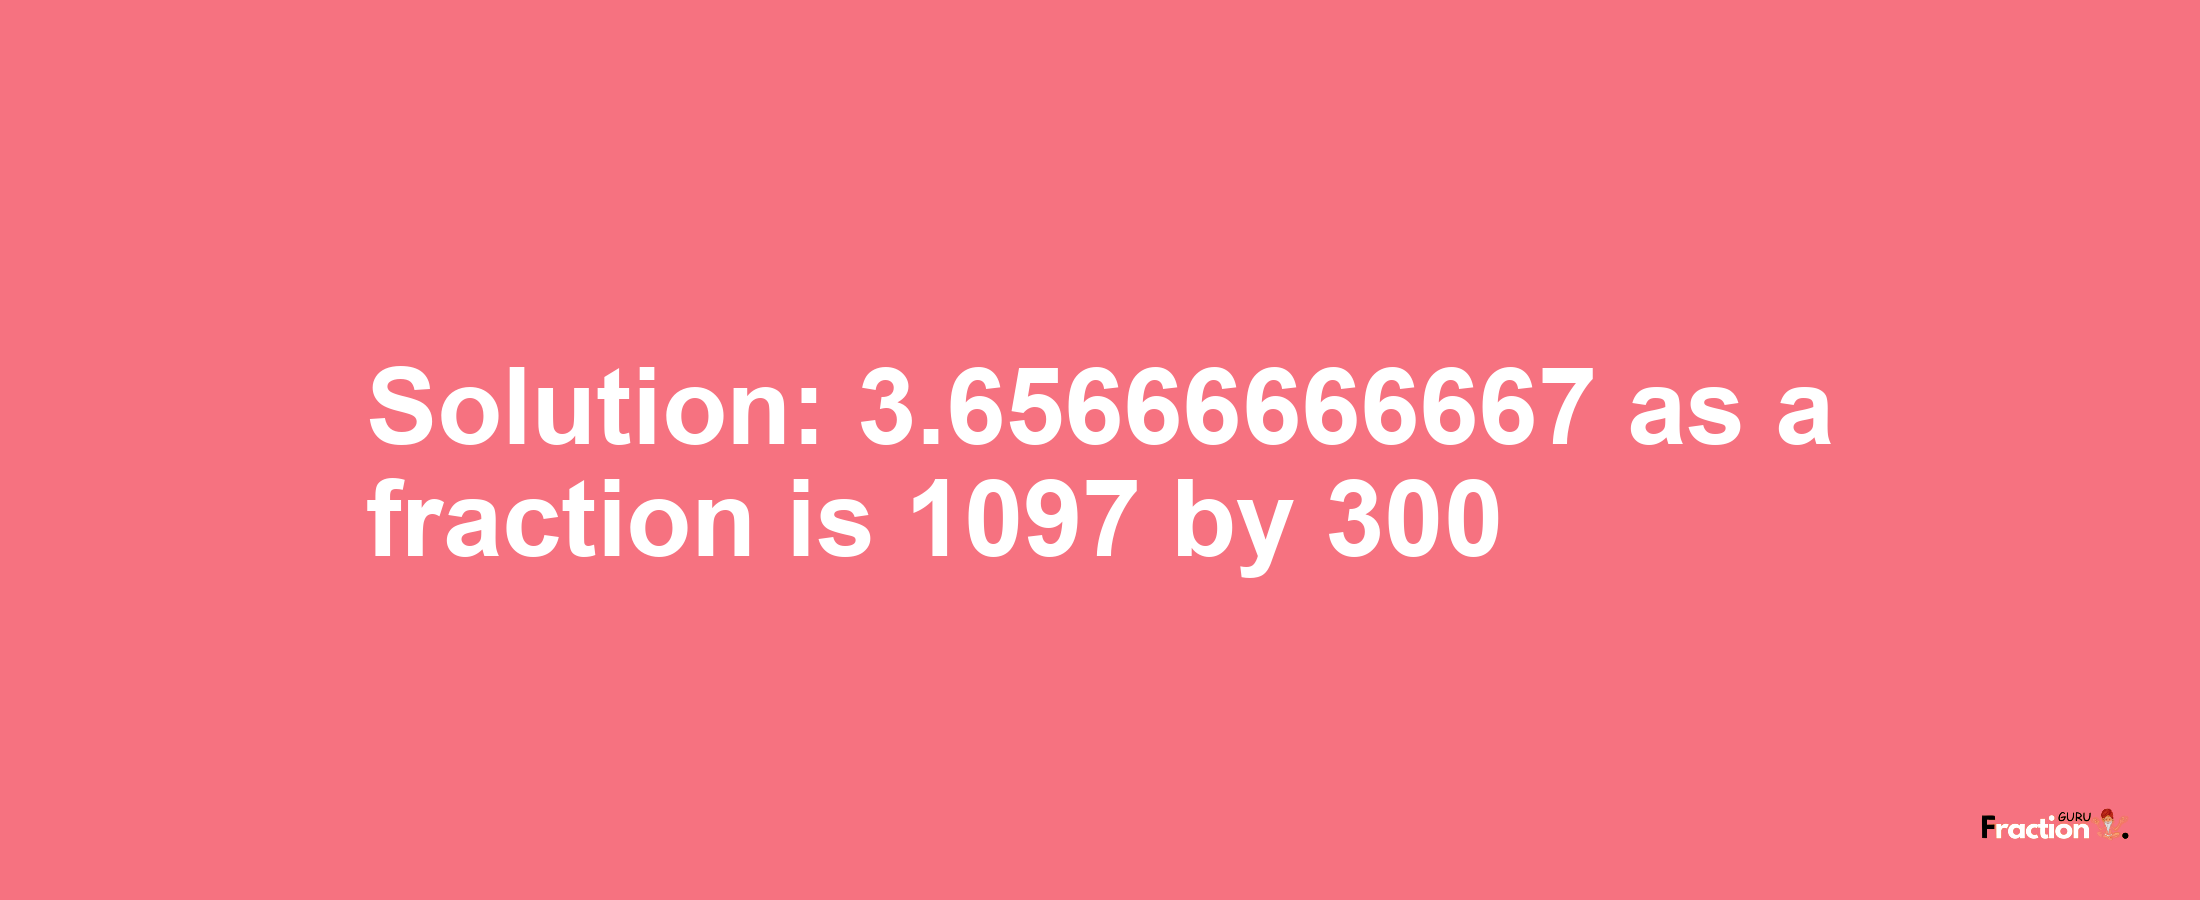 Solution:3.65666666667 as a fraction is 1097/300